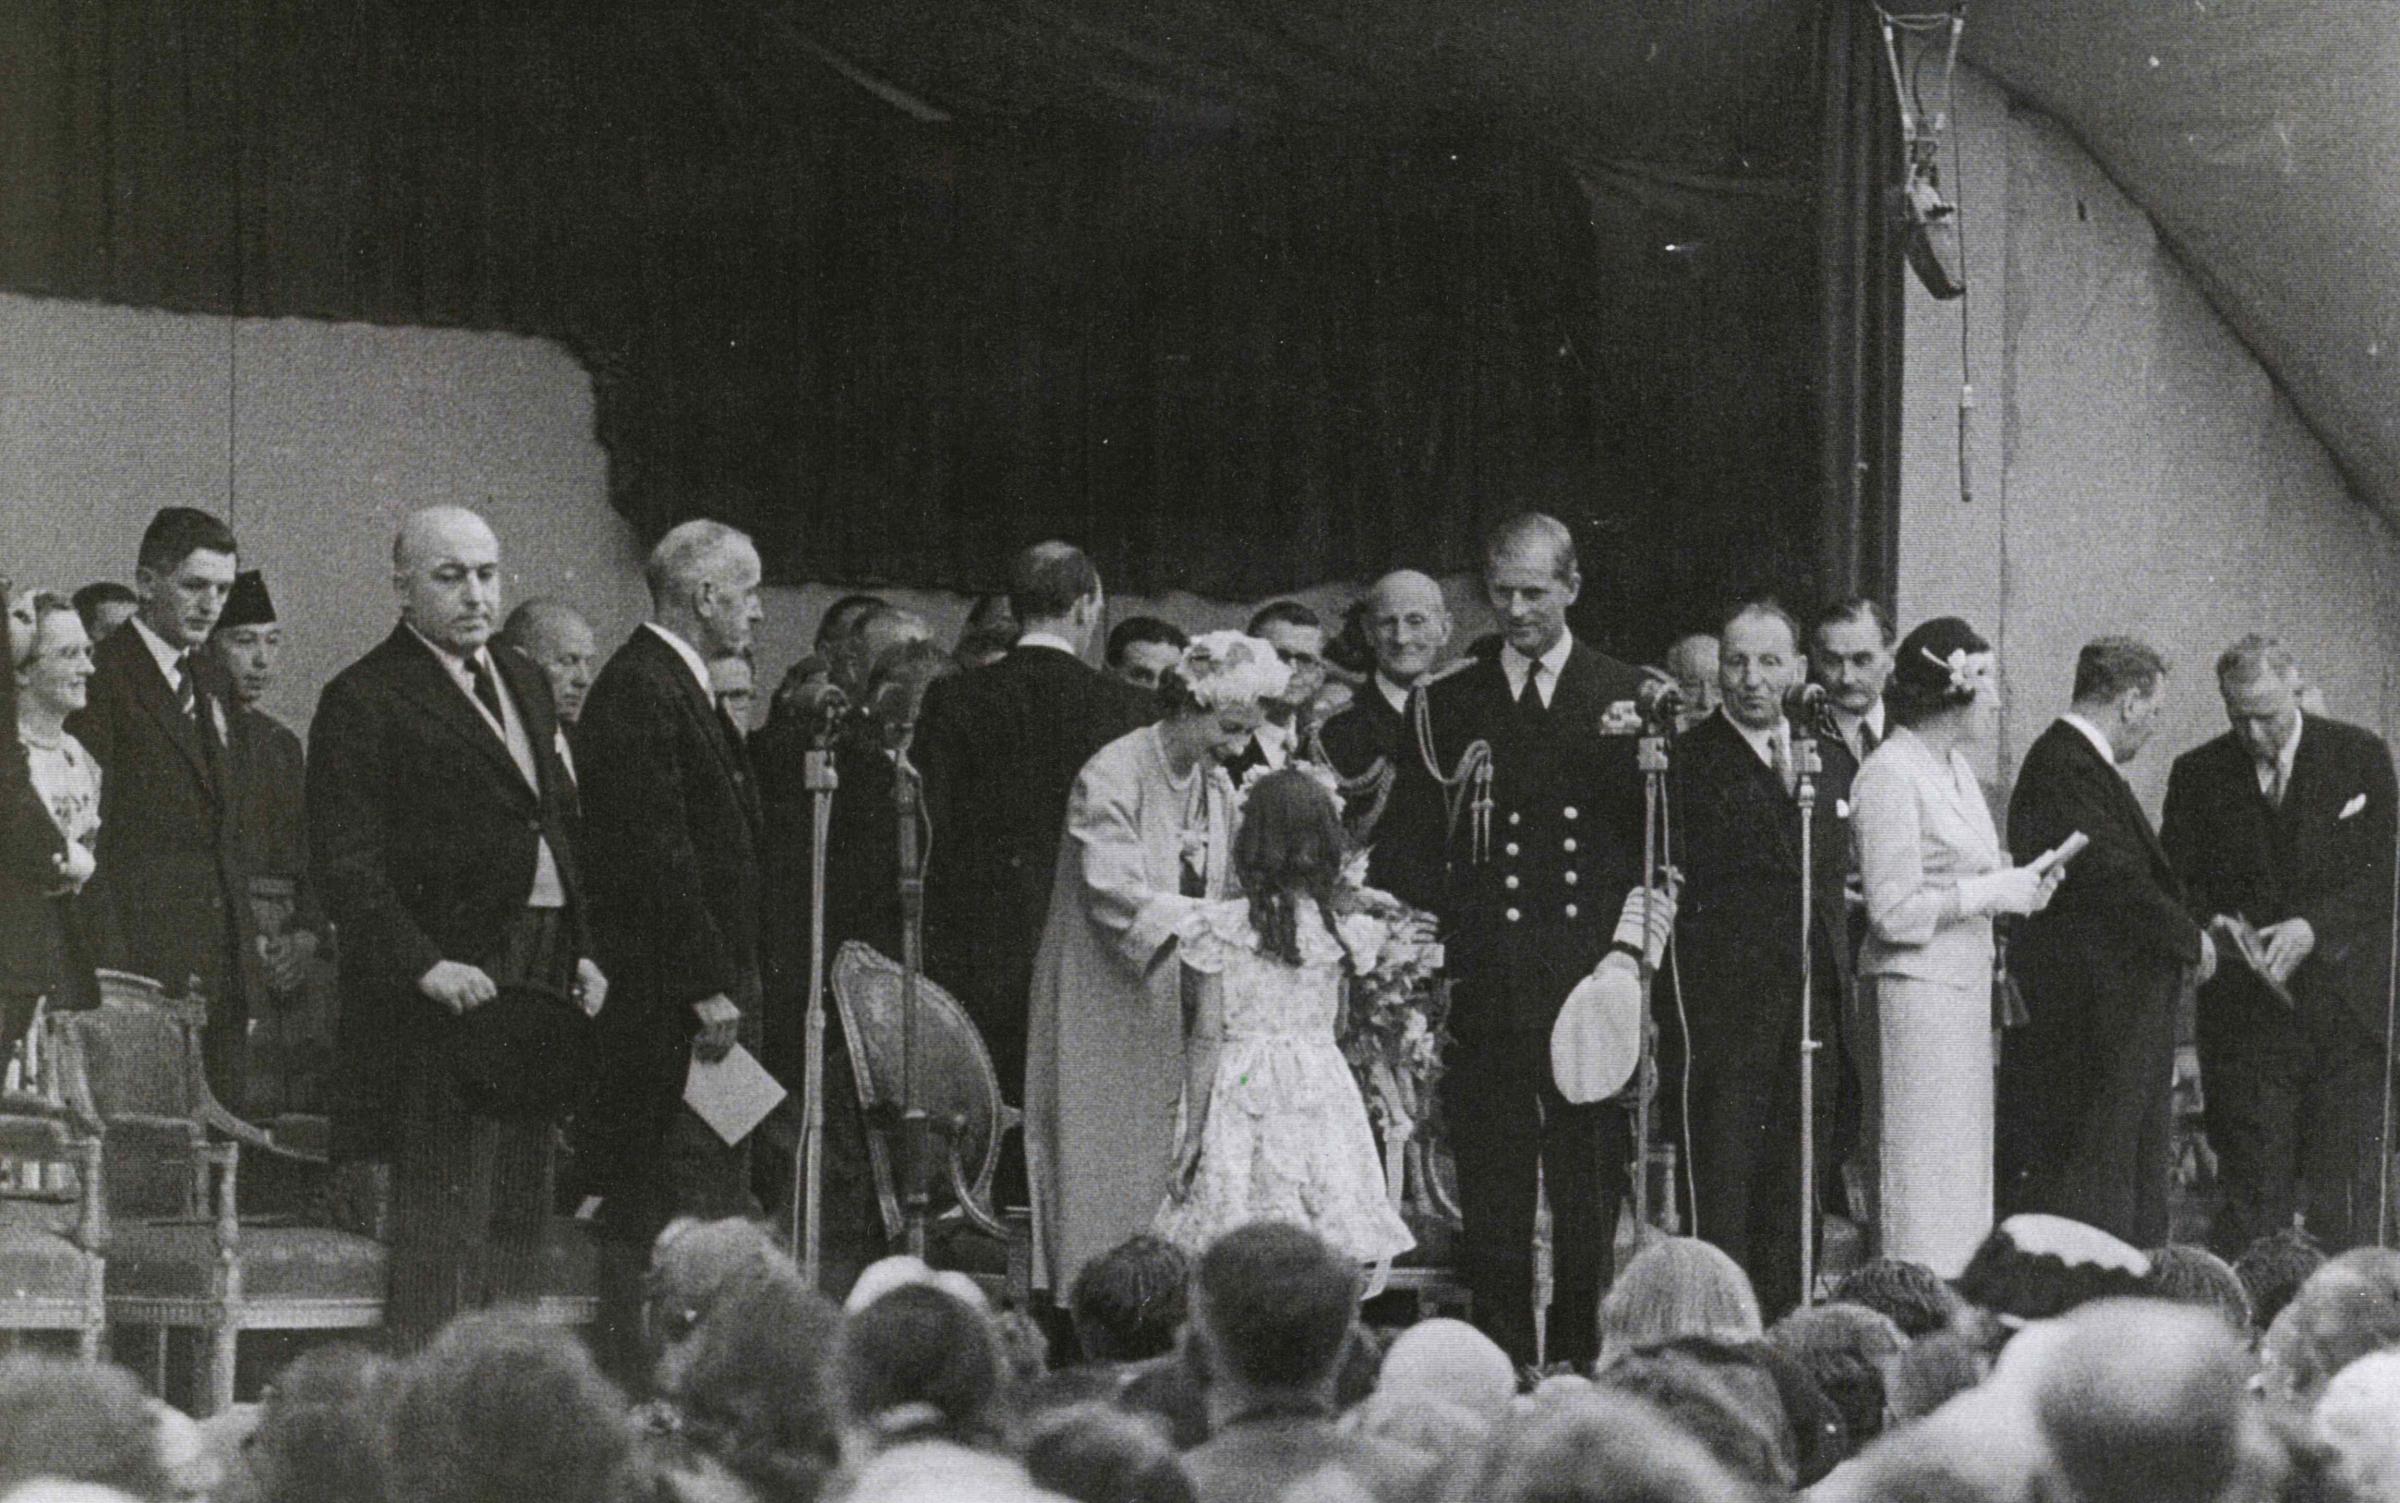 The Queen making a presentation at the eisteddfod shortly after her coronation.